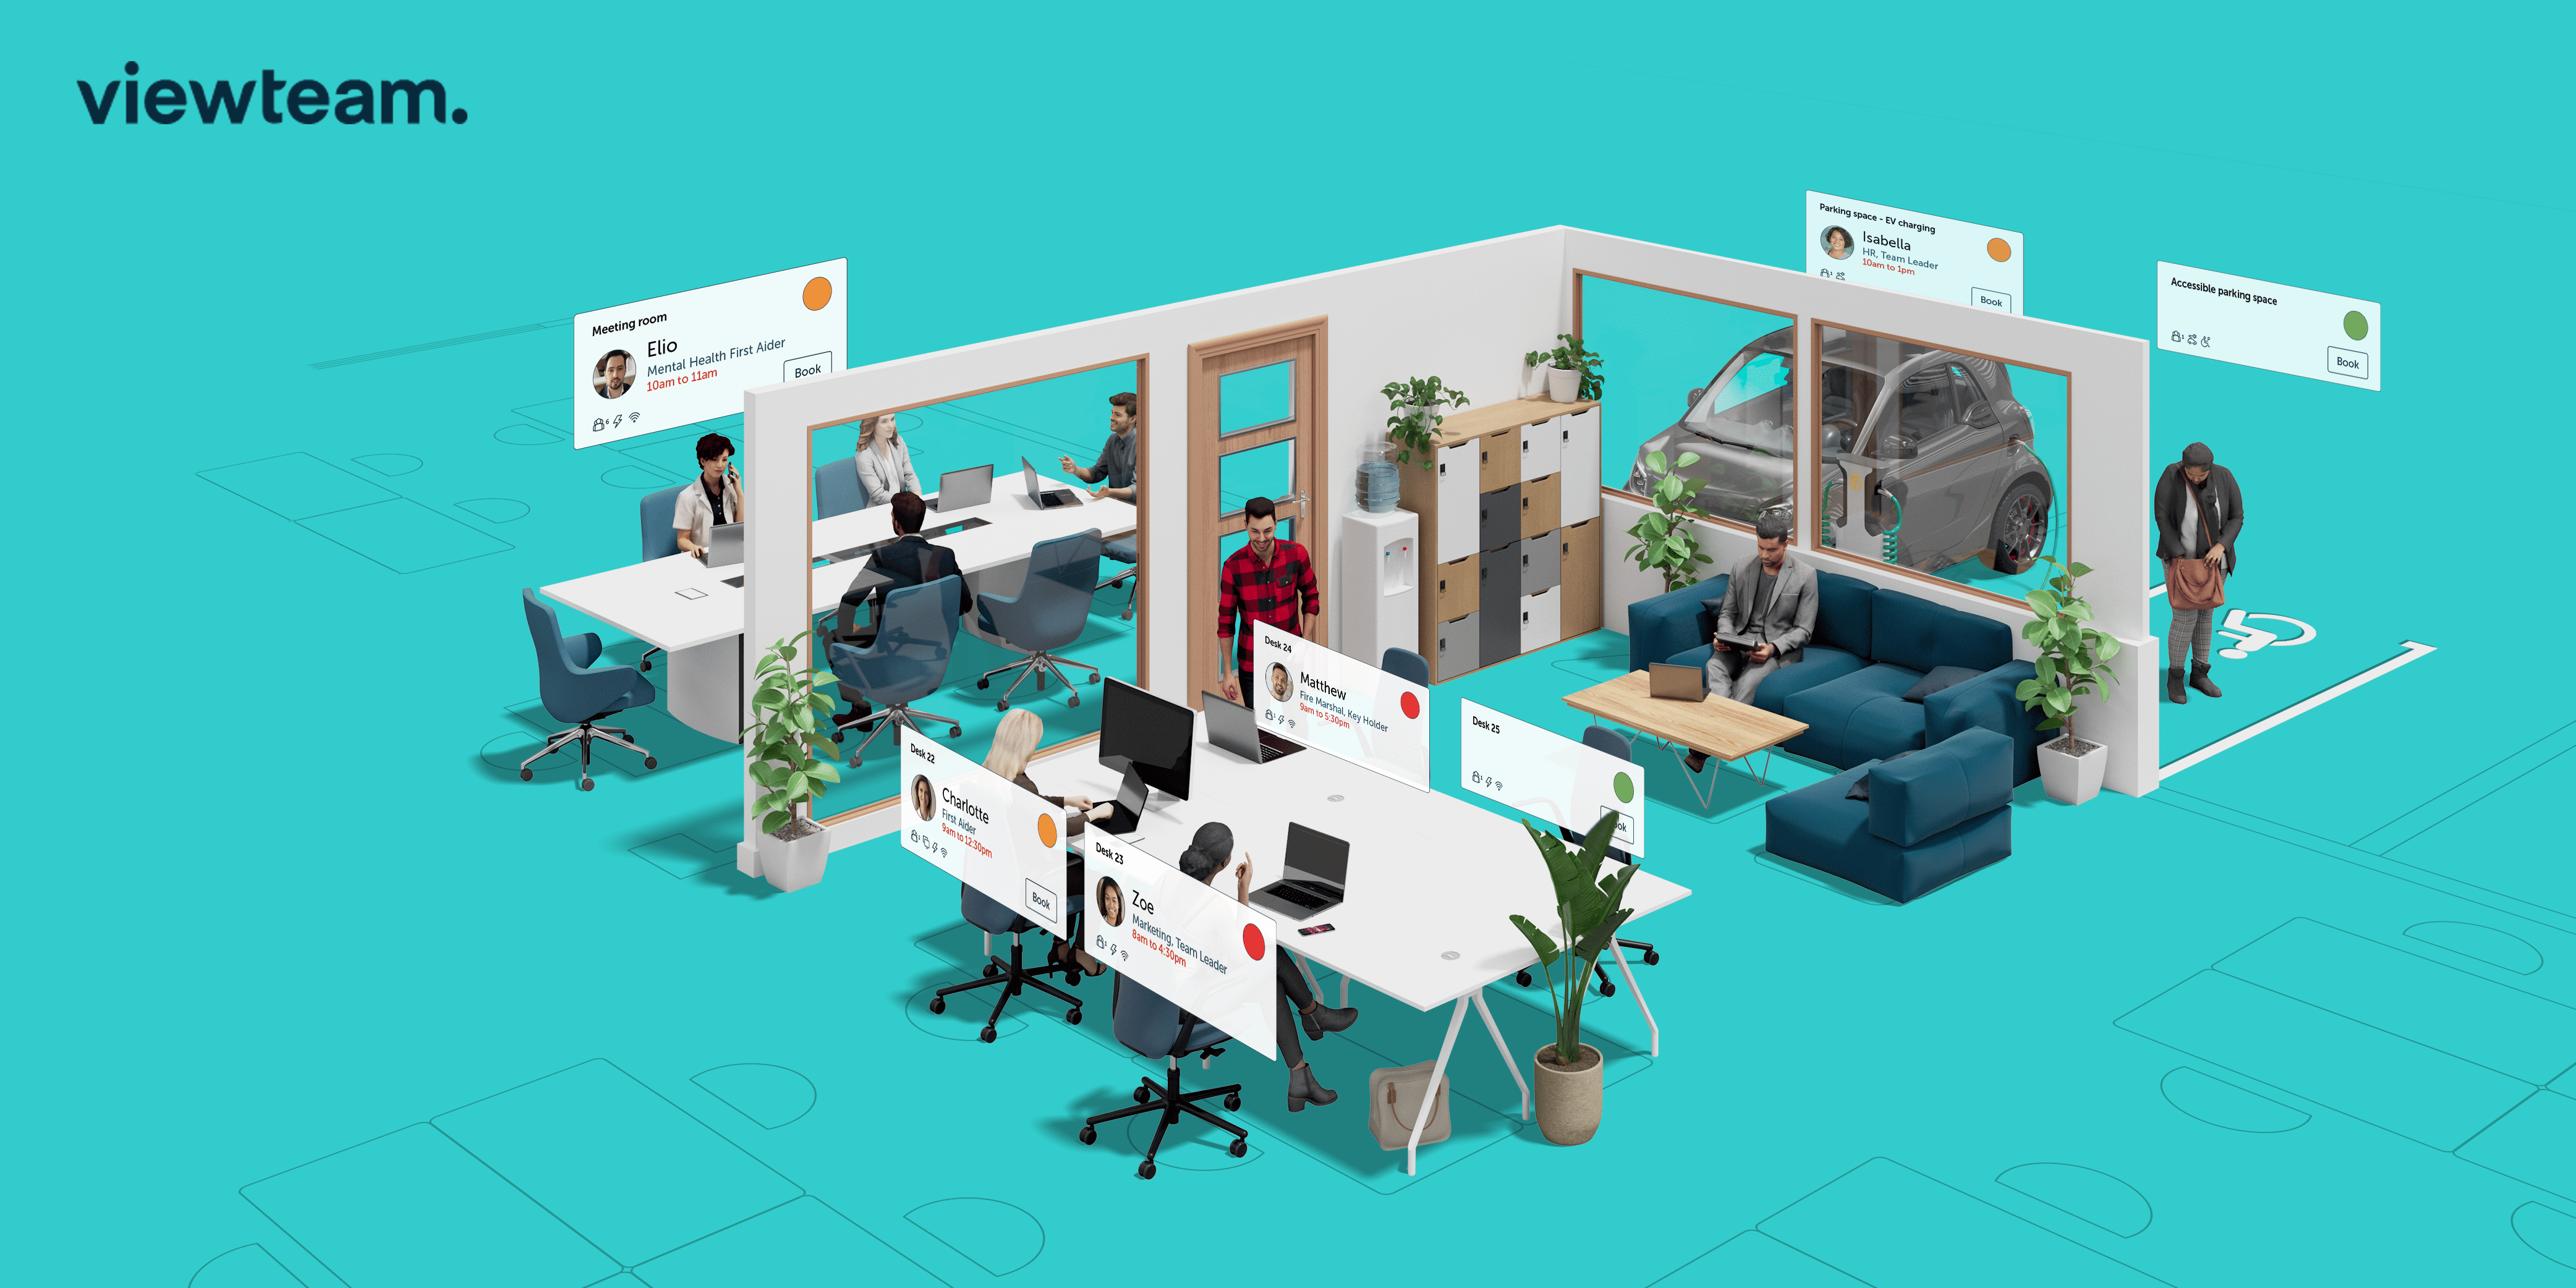  an illustration depicting an office using Viewteam software